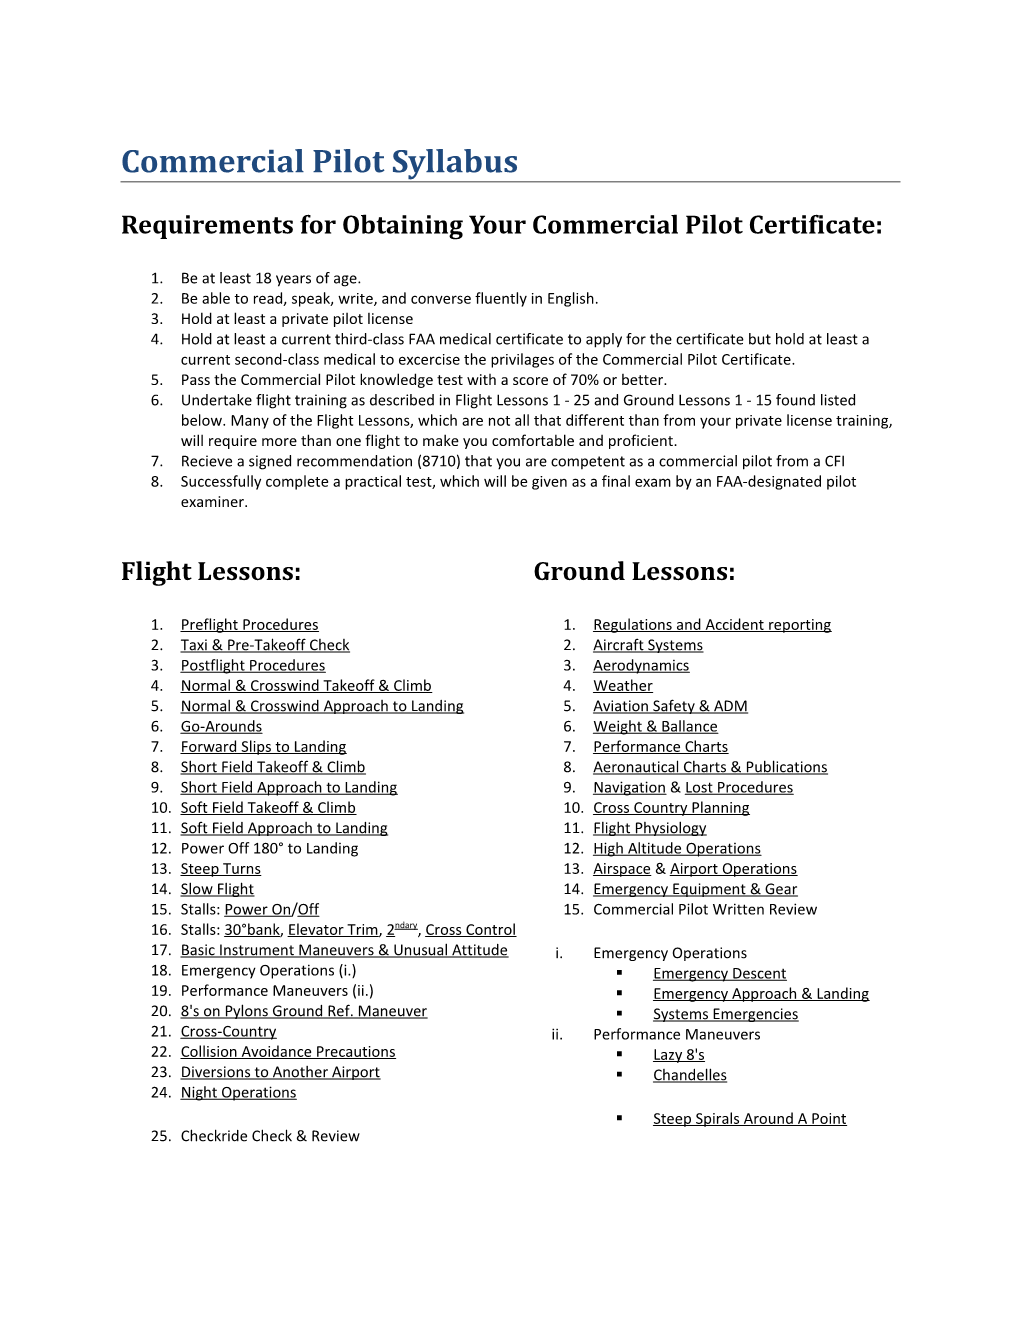 Requirements for Obtaining Your Commercial Pilot Certificate